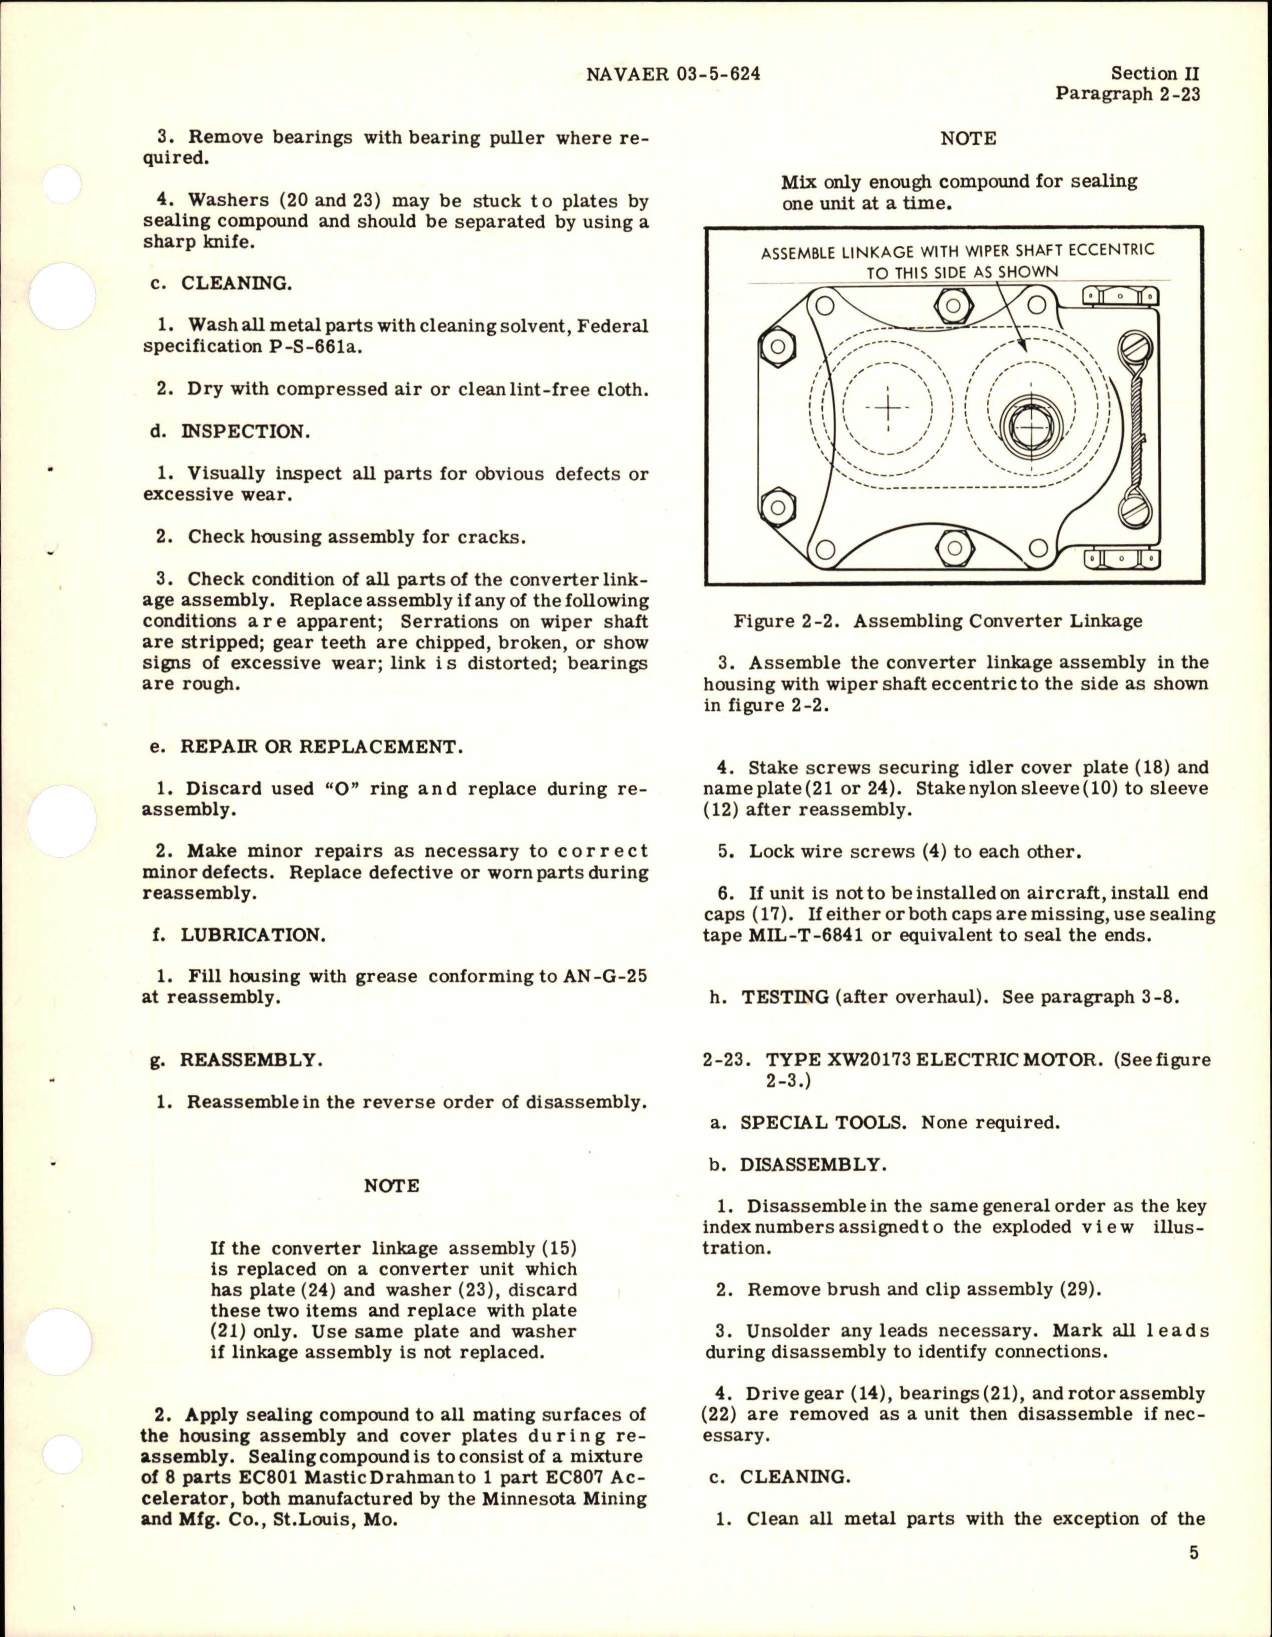 Sample page 7 from AirCorps Library document: Overhaul Instructions for Electric Windshield Wiper Systems  